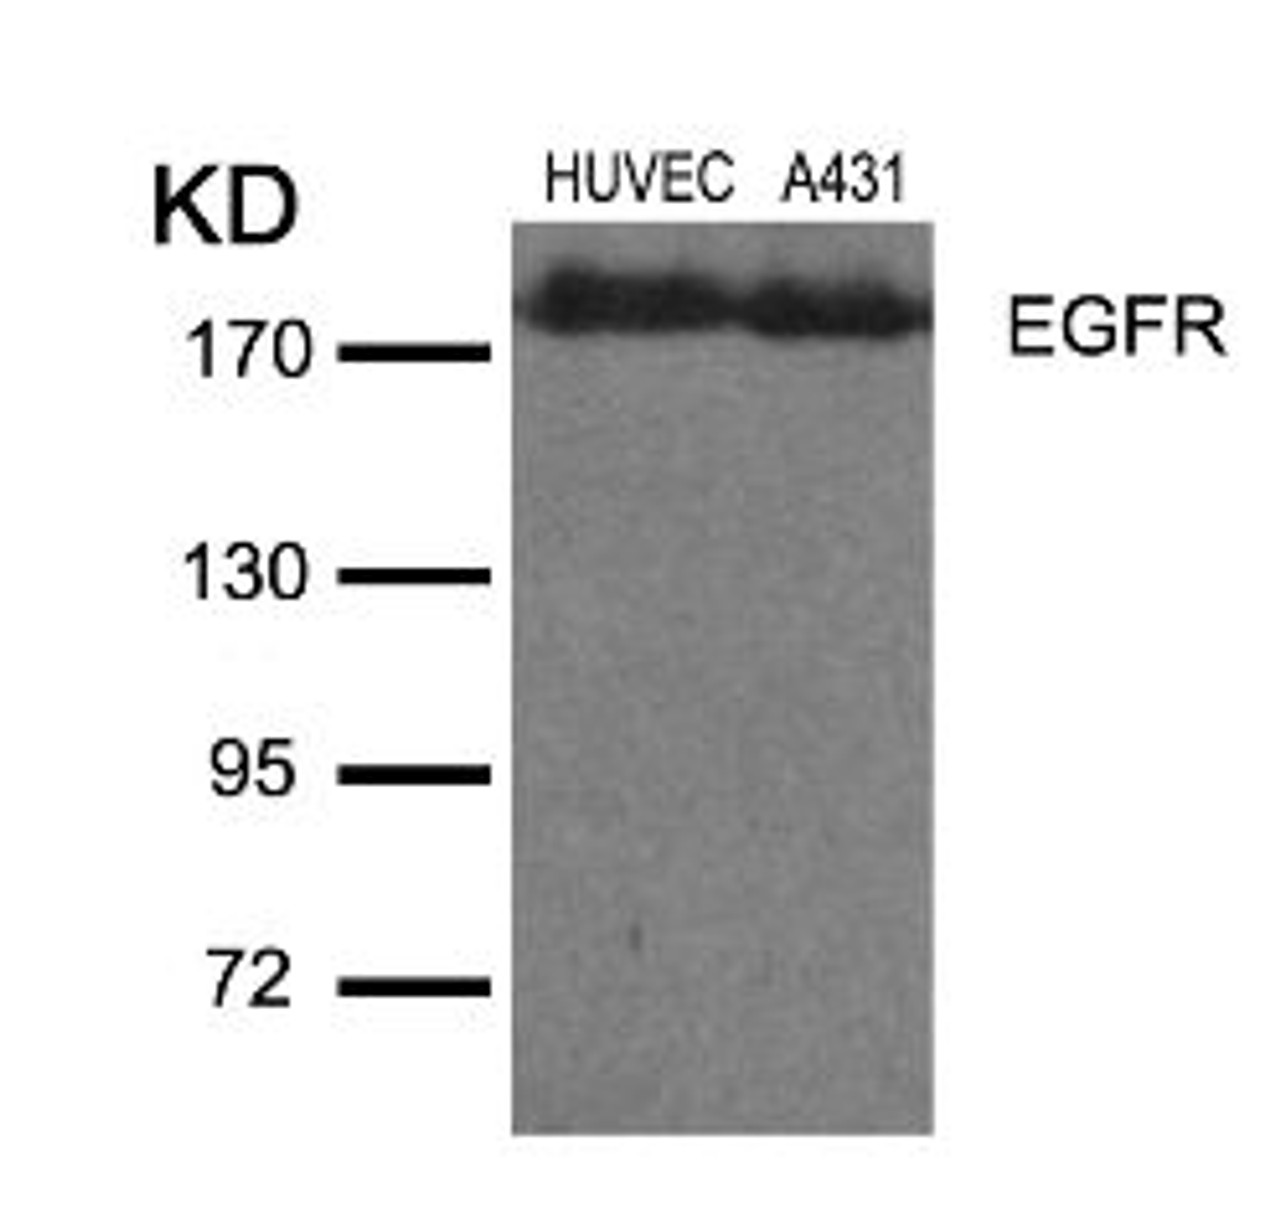 Western blot analysis of lysed extracts from HUVEC and A431 cells using EGFR (Ab-1110) .